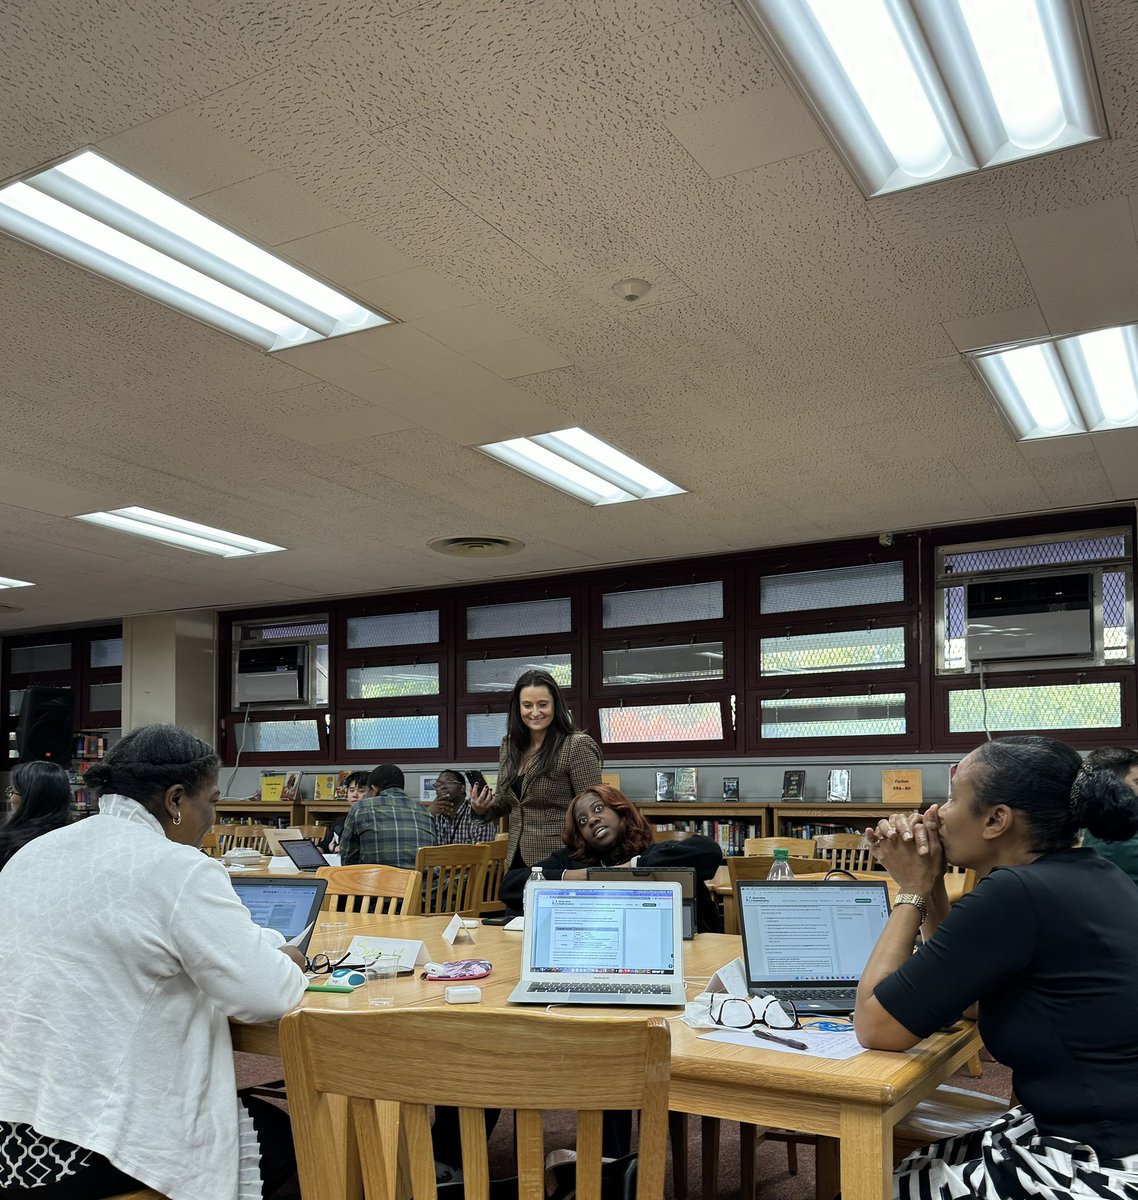 Yet another love of learning day at Brooklyn North HS! Our illustrious math leads, Esther and Andrada leading an Illustrative Math PL for our #bknhsbrilliant math teachers!